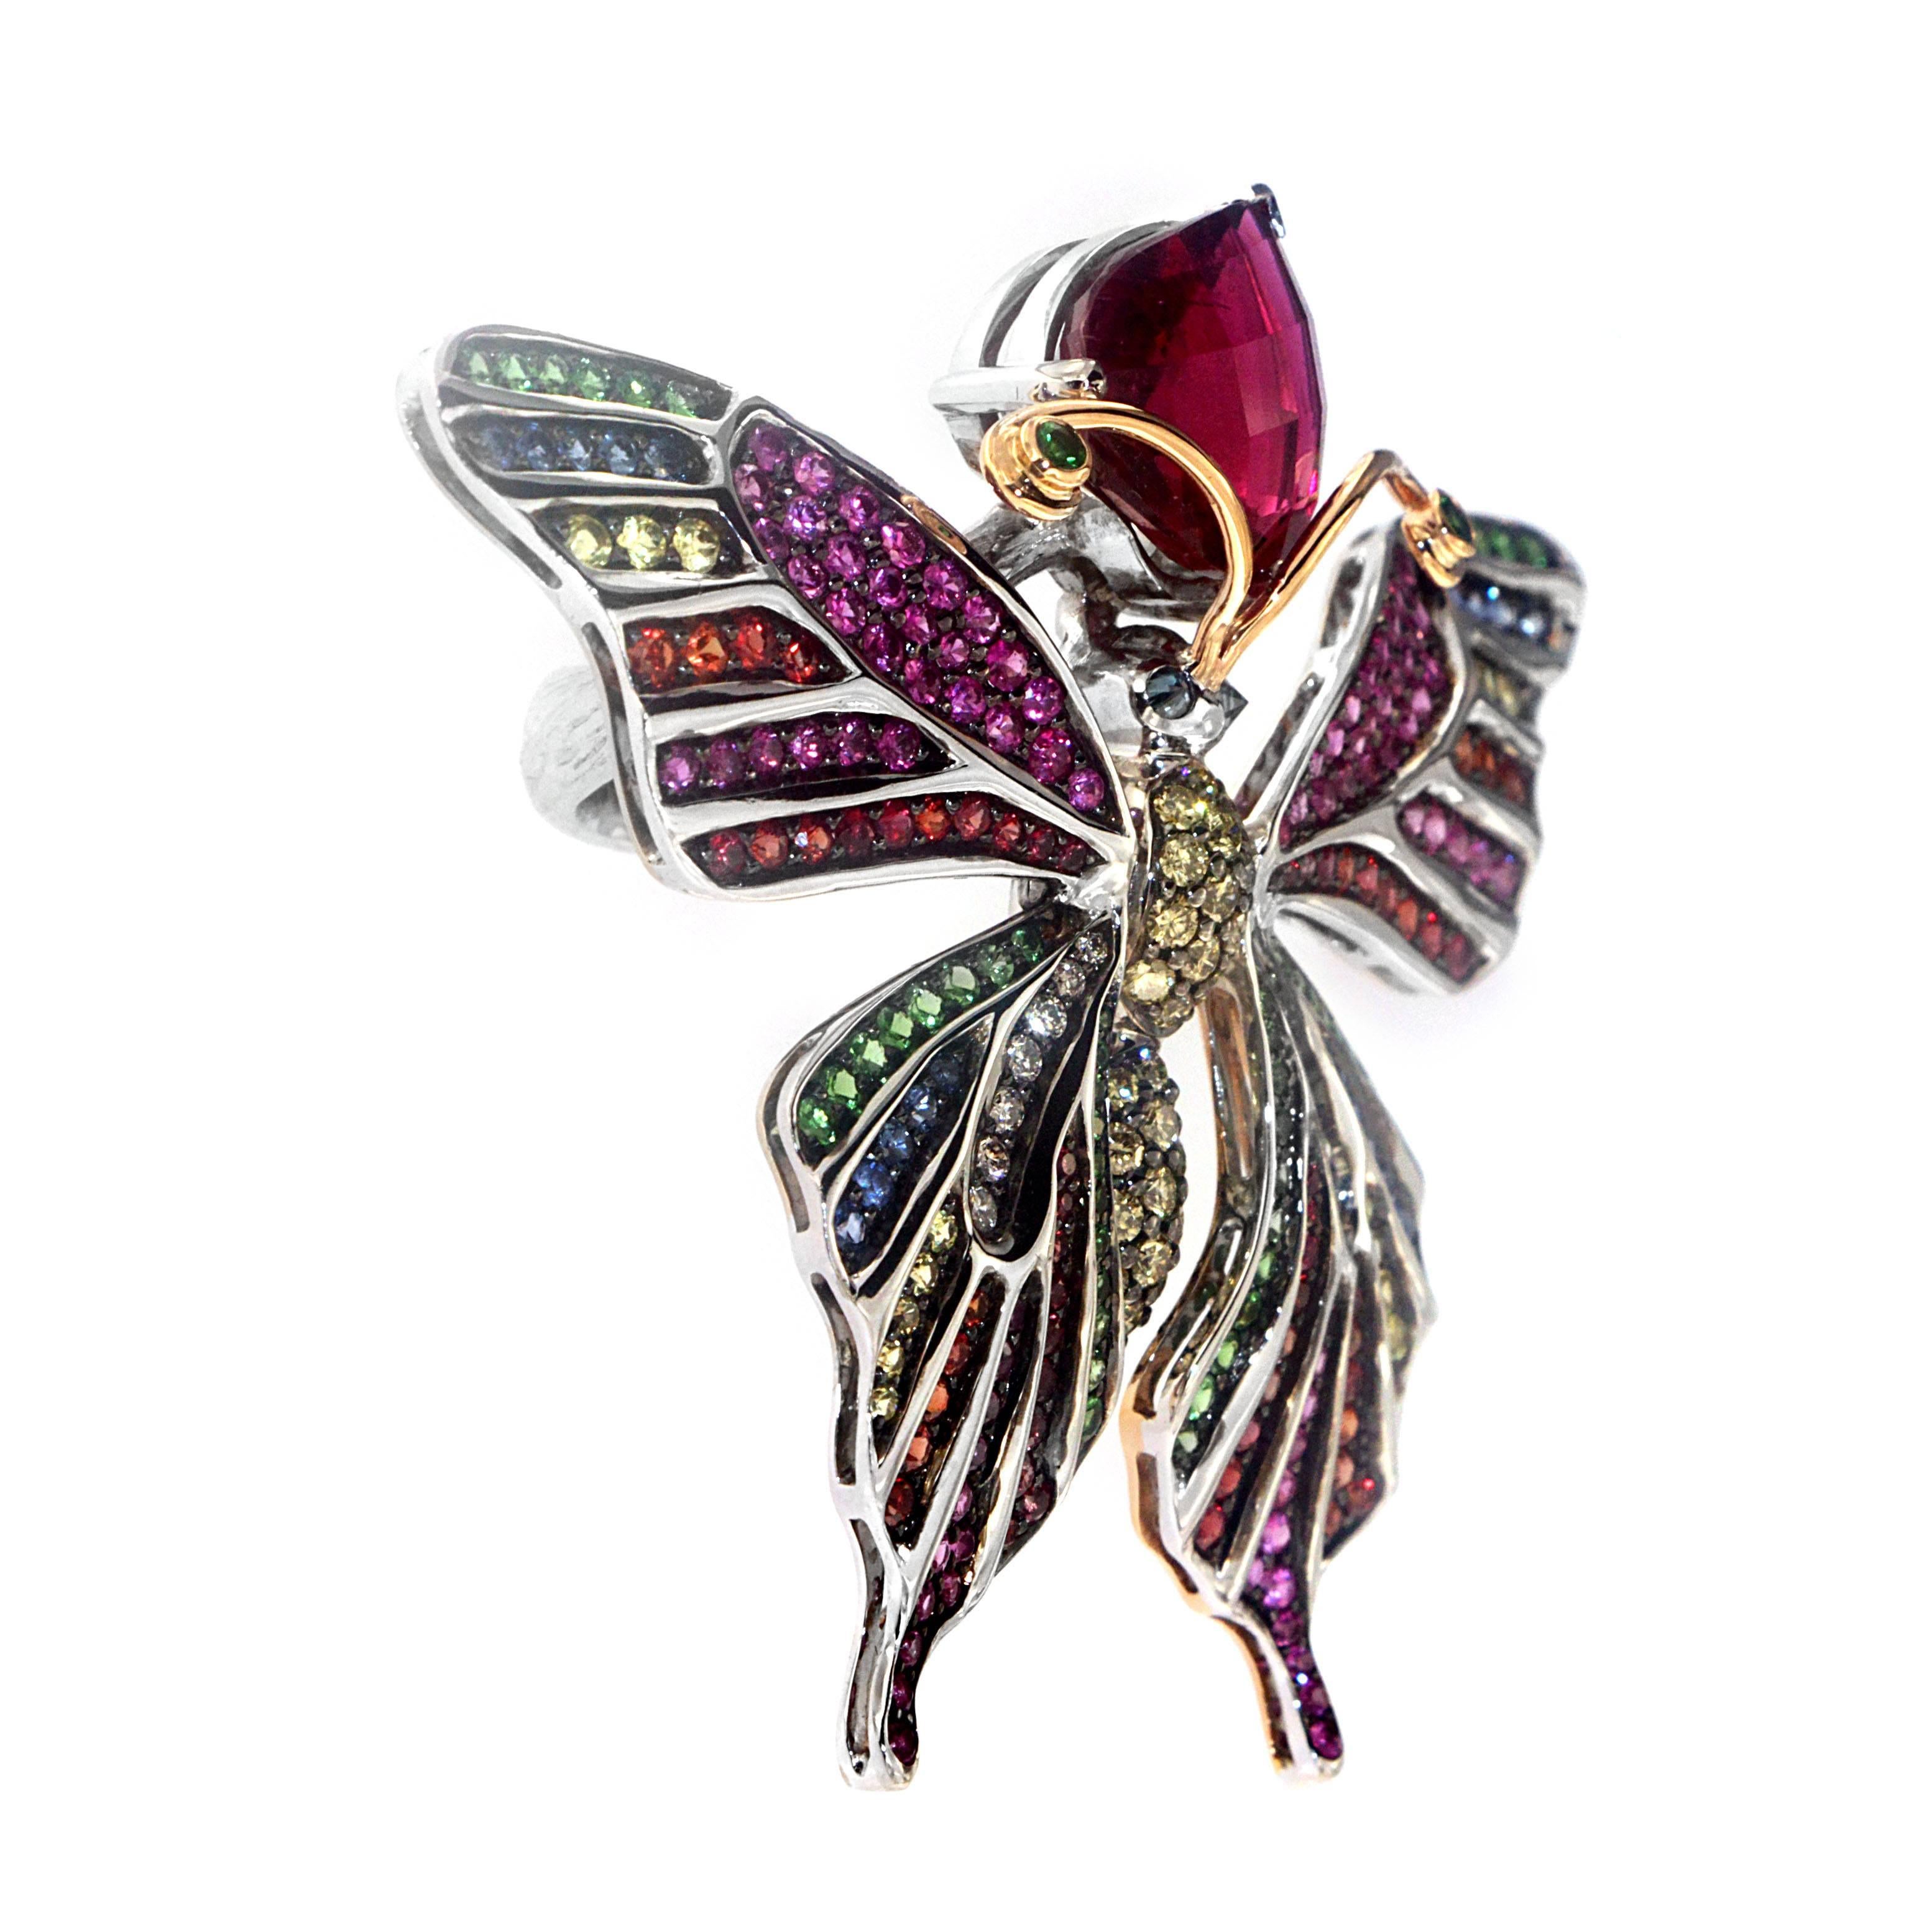 The delicate creature with painted wings of multi-colored sapphire (4.36 carats), Tsavorite Garnet (1.05 carats), White Diamonds (0.25 carats) and Blue Diamonds (0.06 carats) has gently landed on a Ruby (9.35 carats) flower. Zorab's exquisite 18 Kt